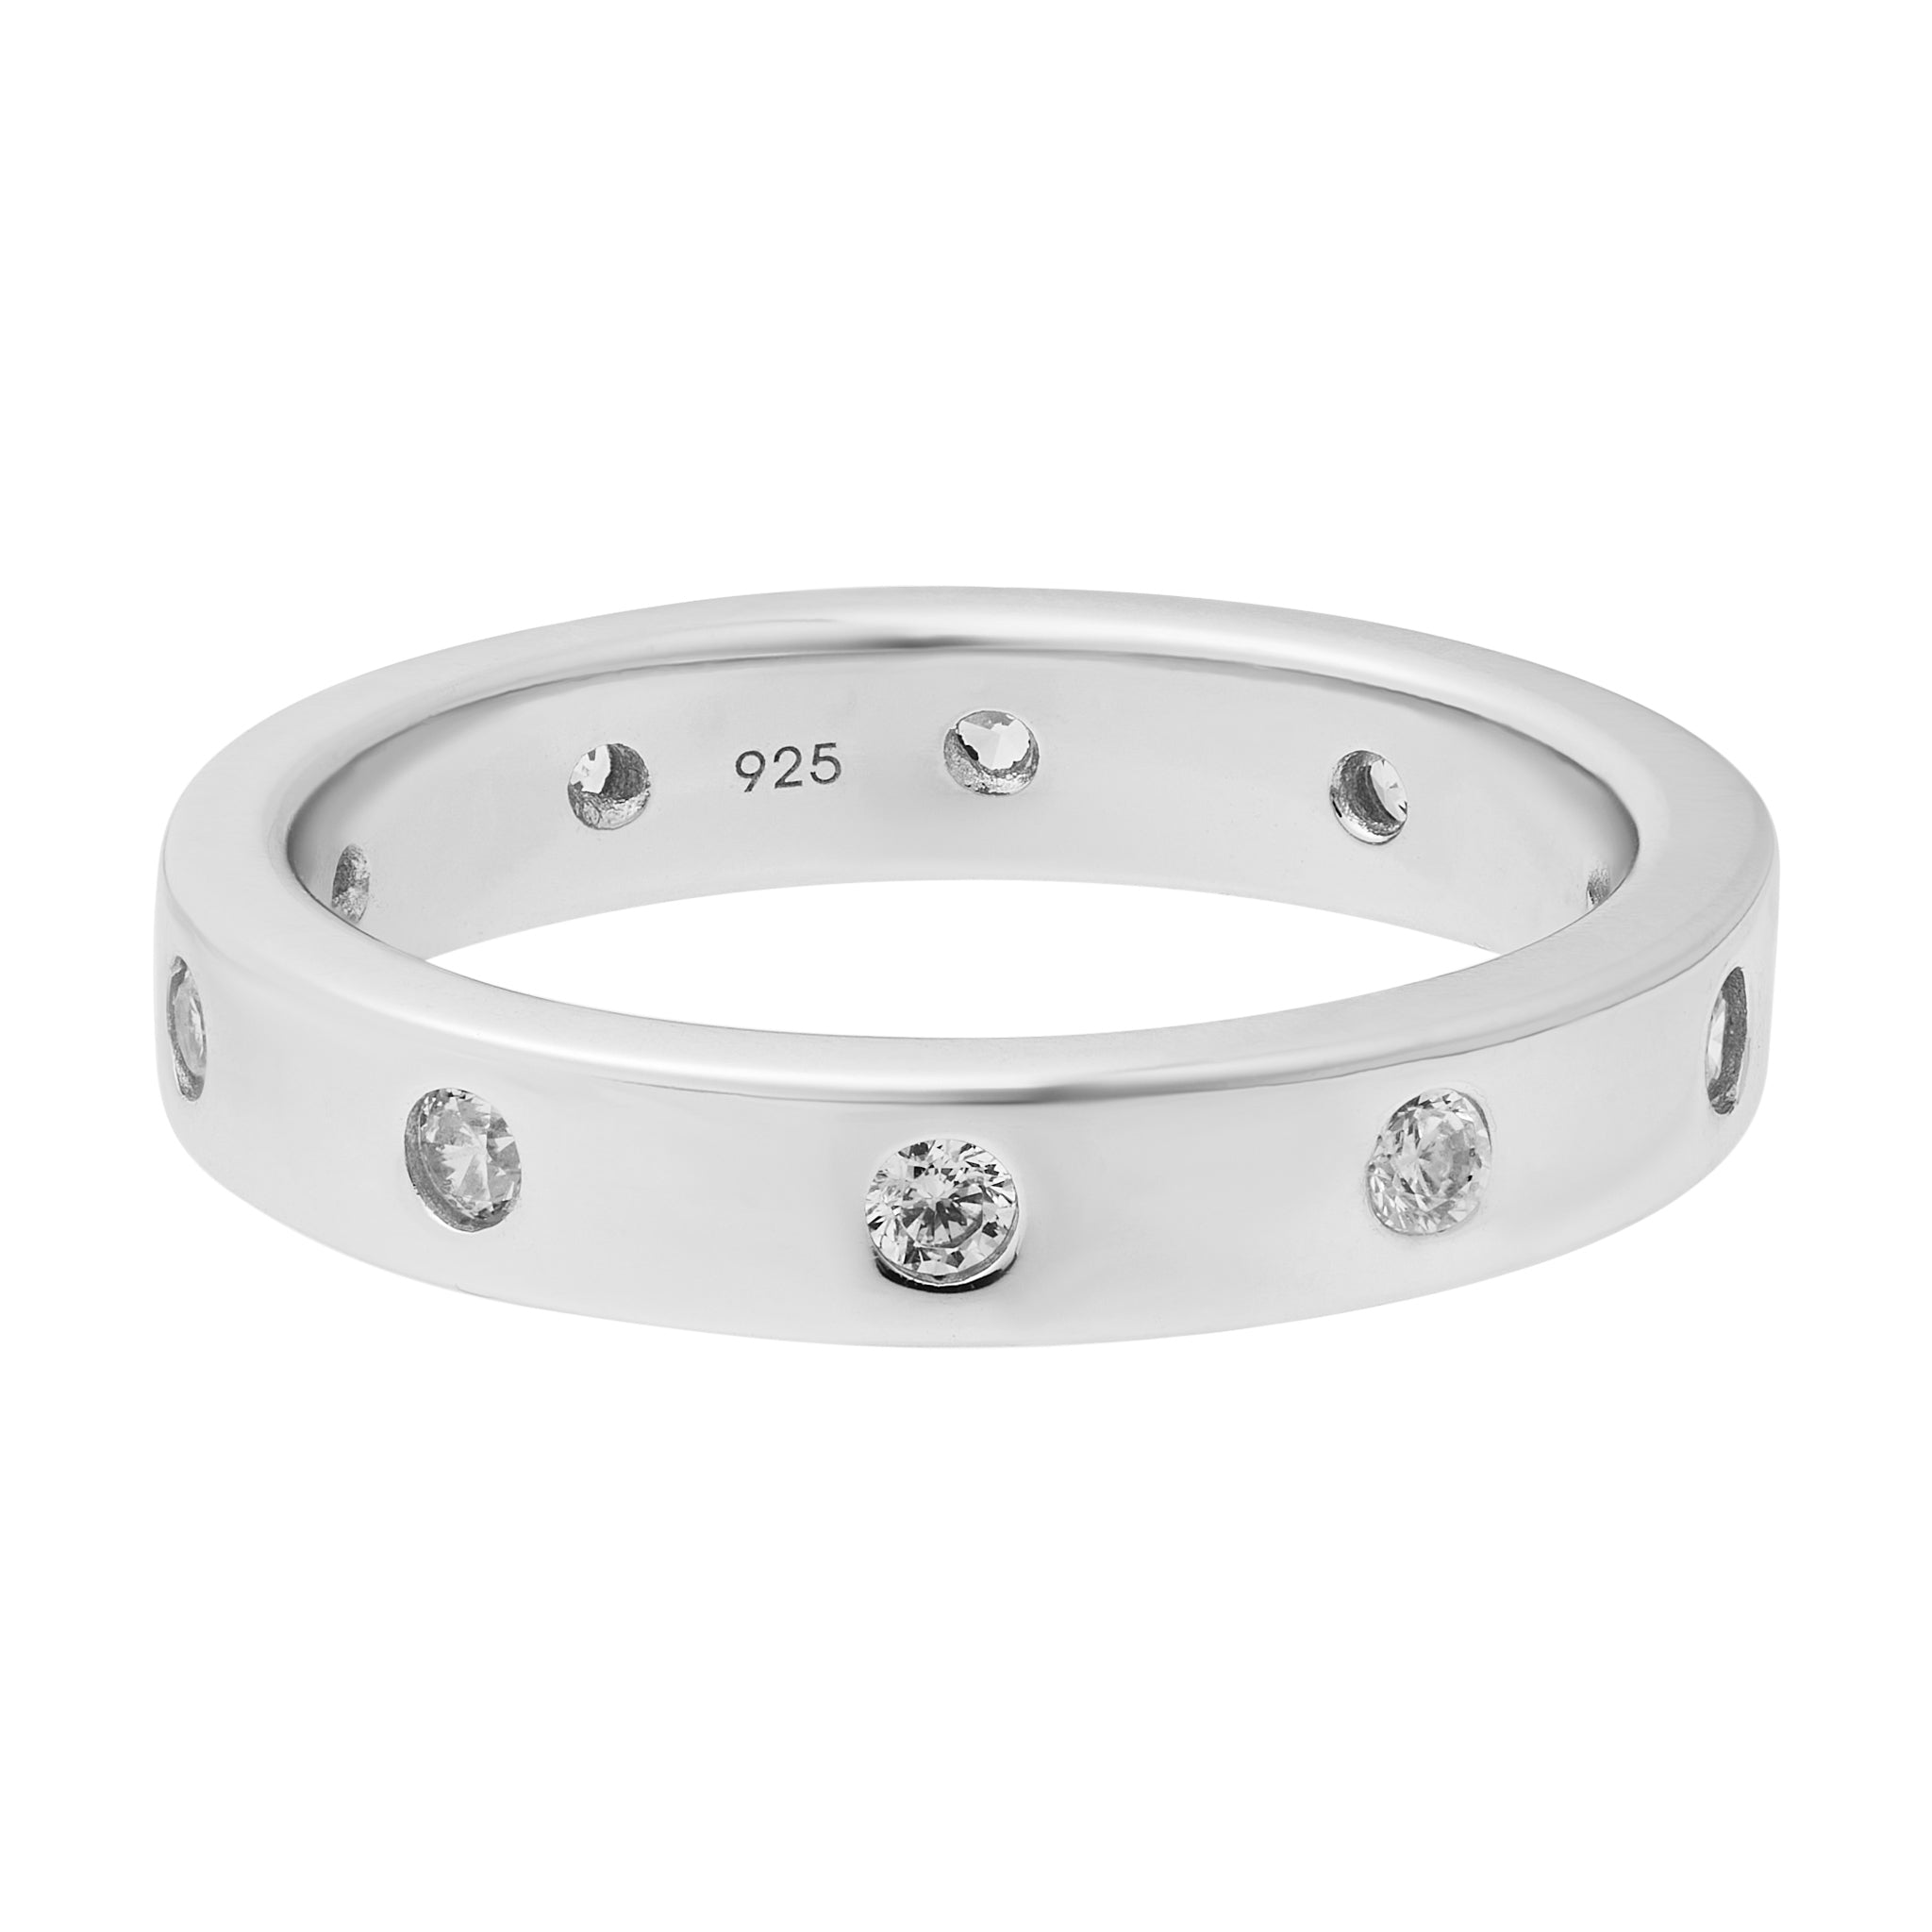 Sparkle Band Ring - Silver